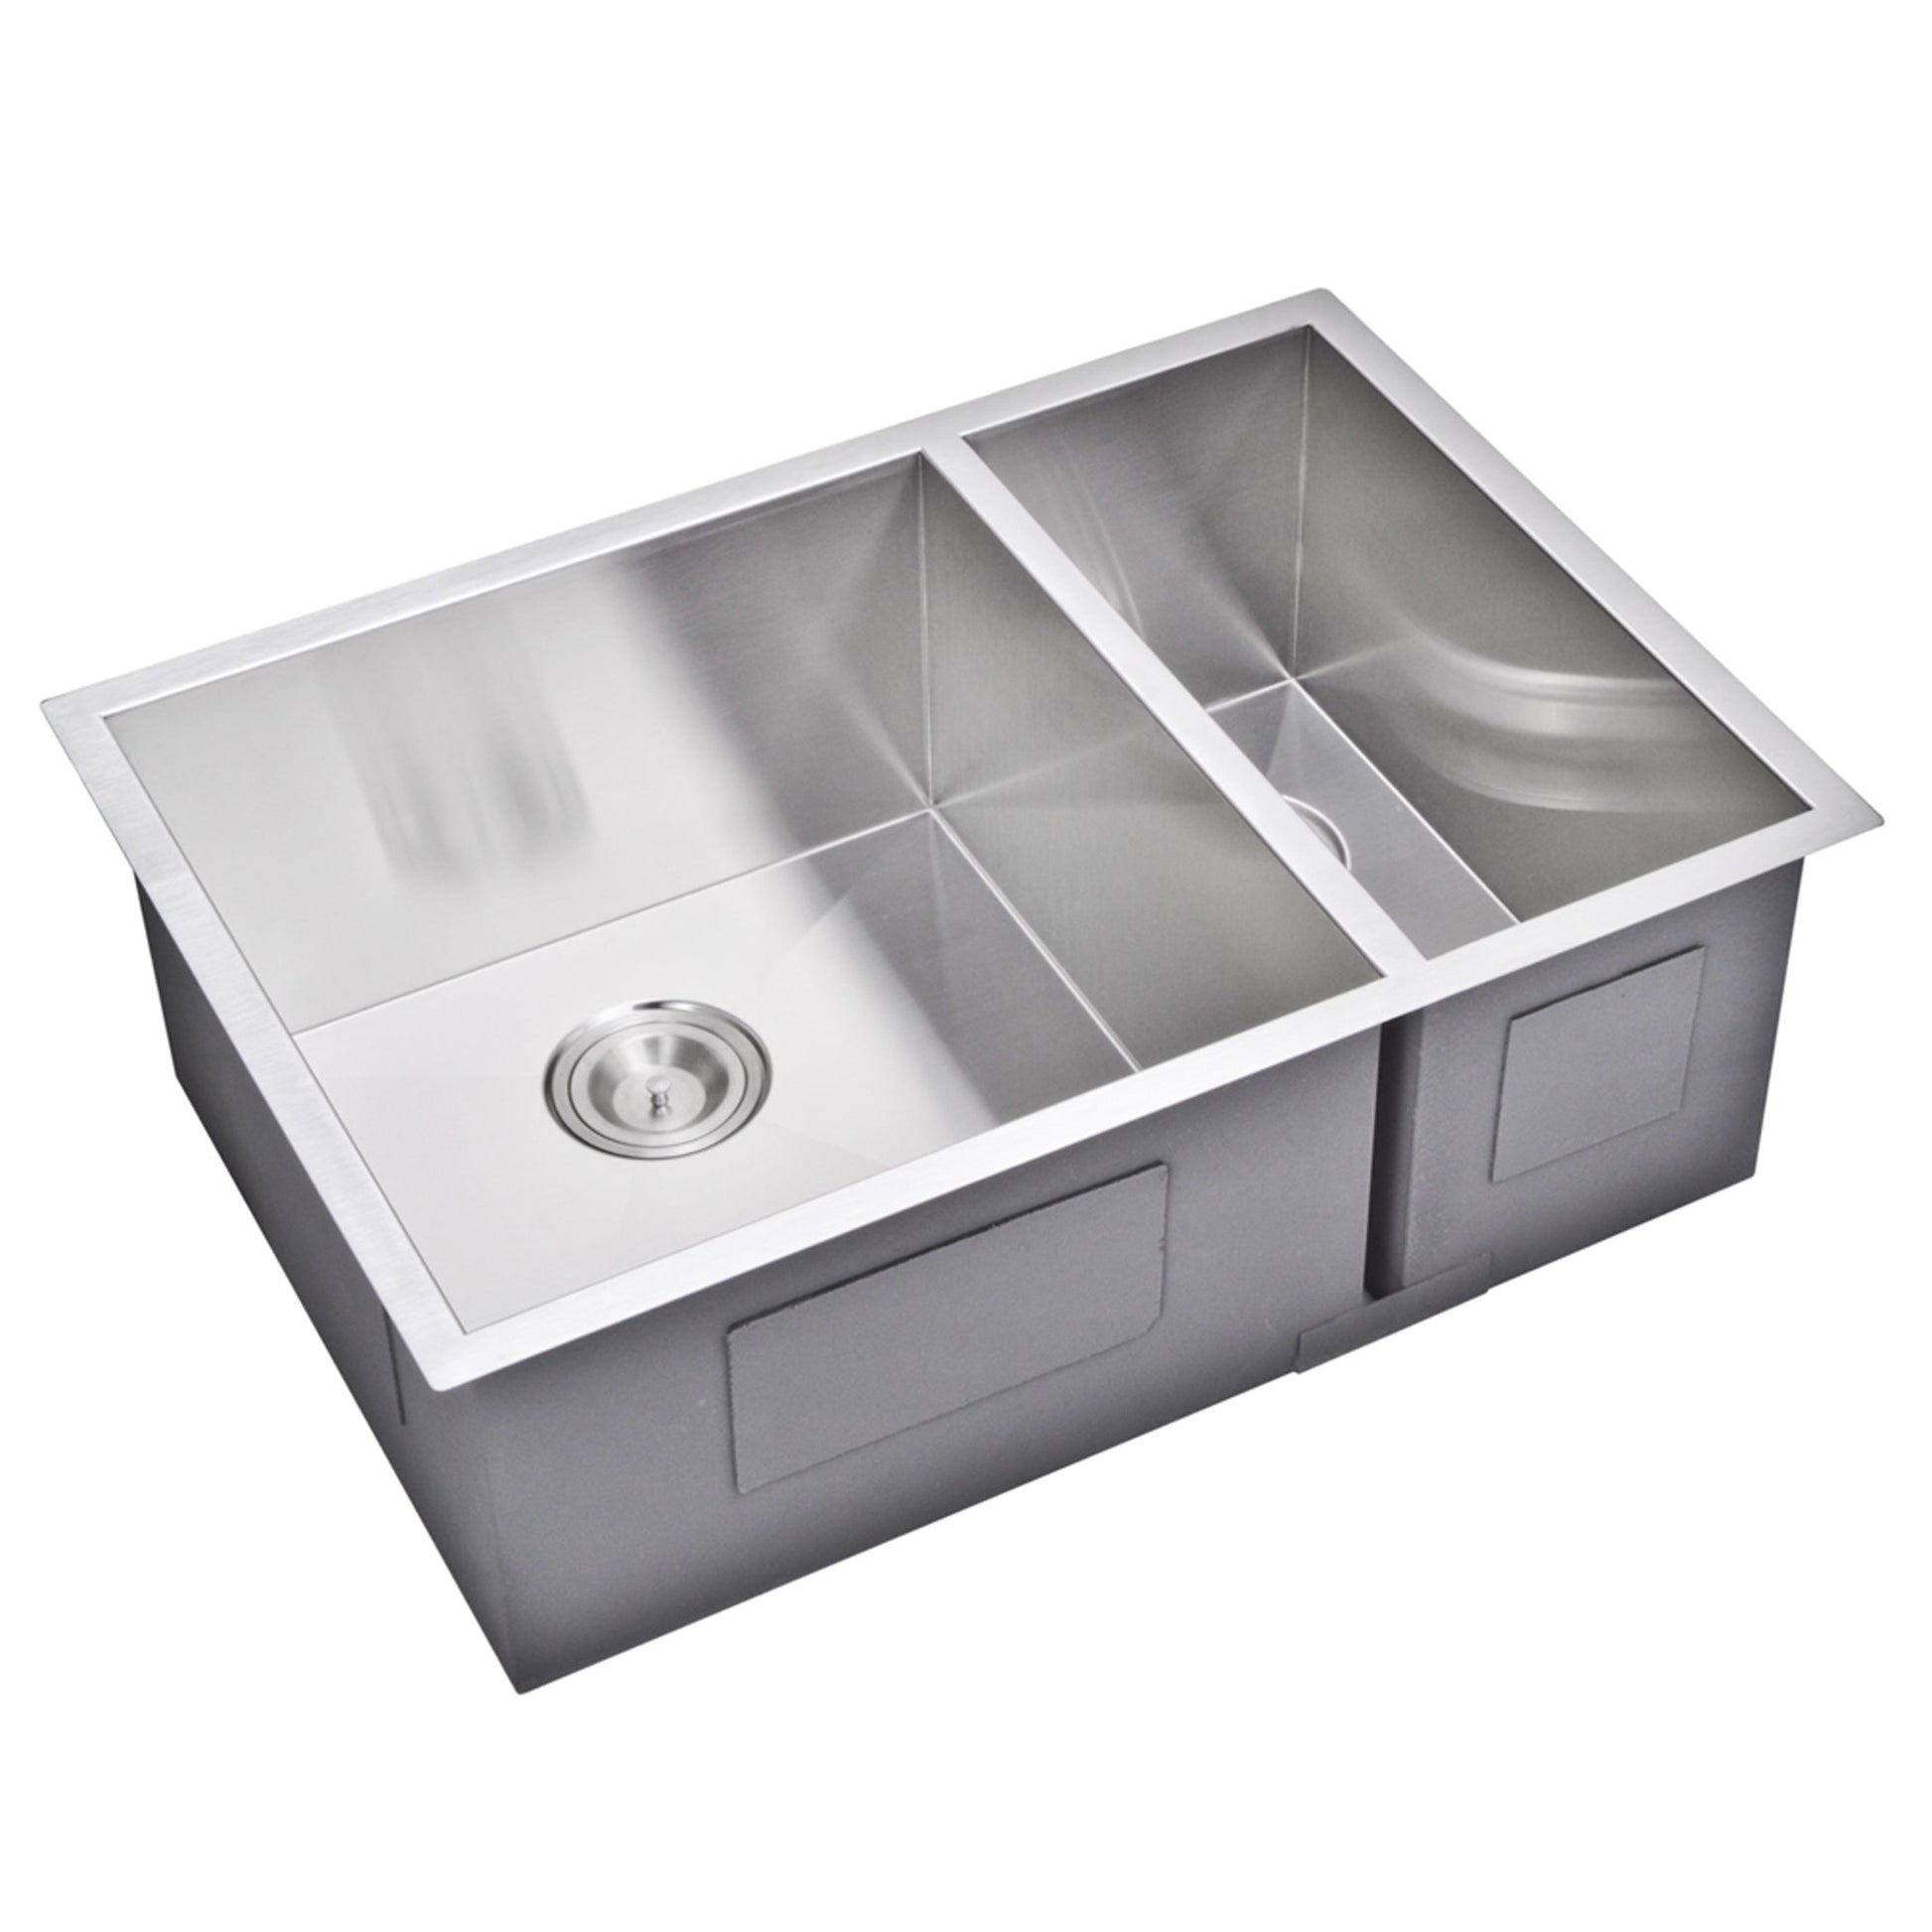 Water Creation Zero Radius 70/30 Double Bowl Stainless Steel Hand Made Undermount 29 Inch X 20 Inch Sink With Drains, Strainers, And Bottom Grids